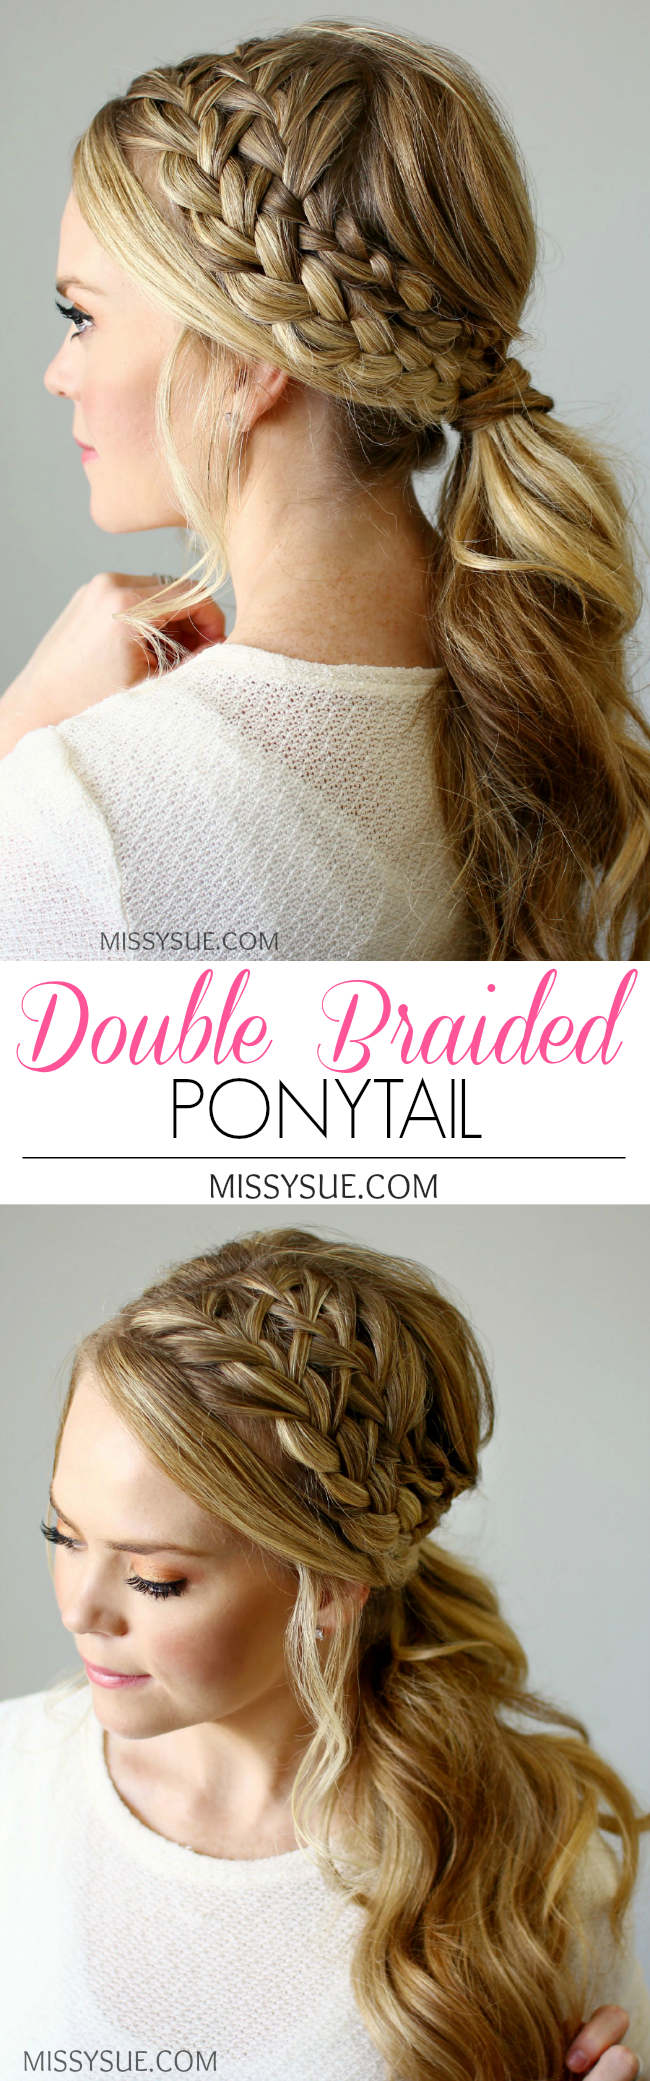 The Prettiest Braided Hairstyles for Long Hair with Tutorials - For